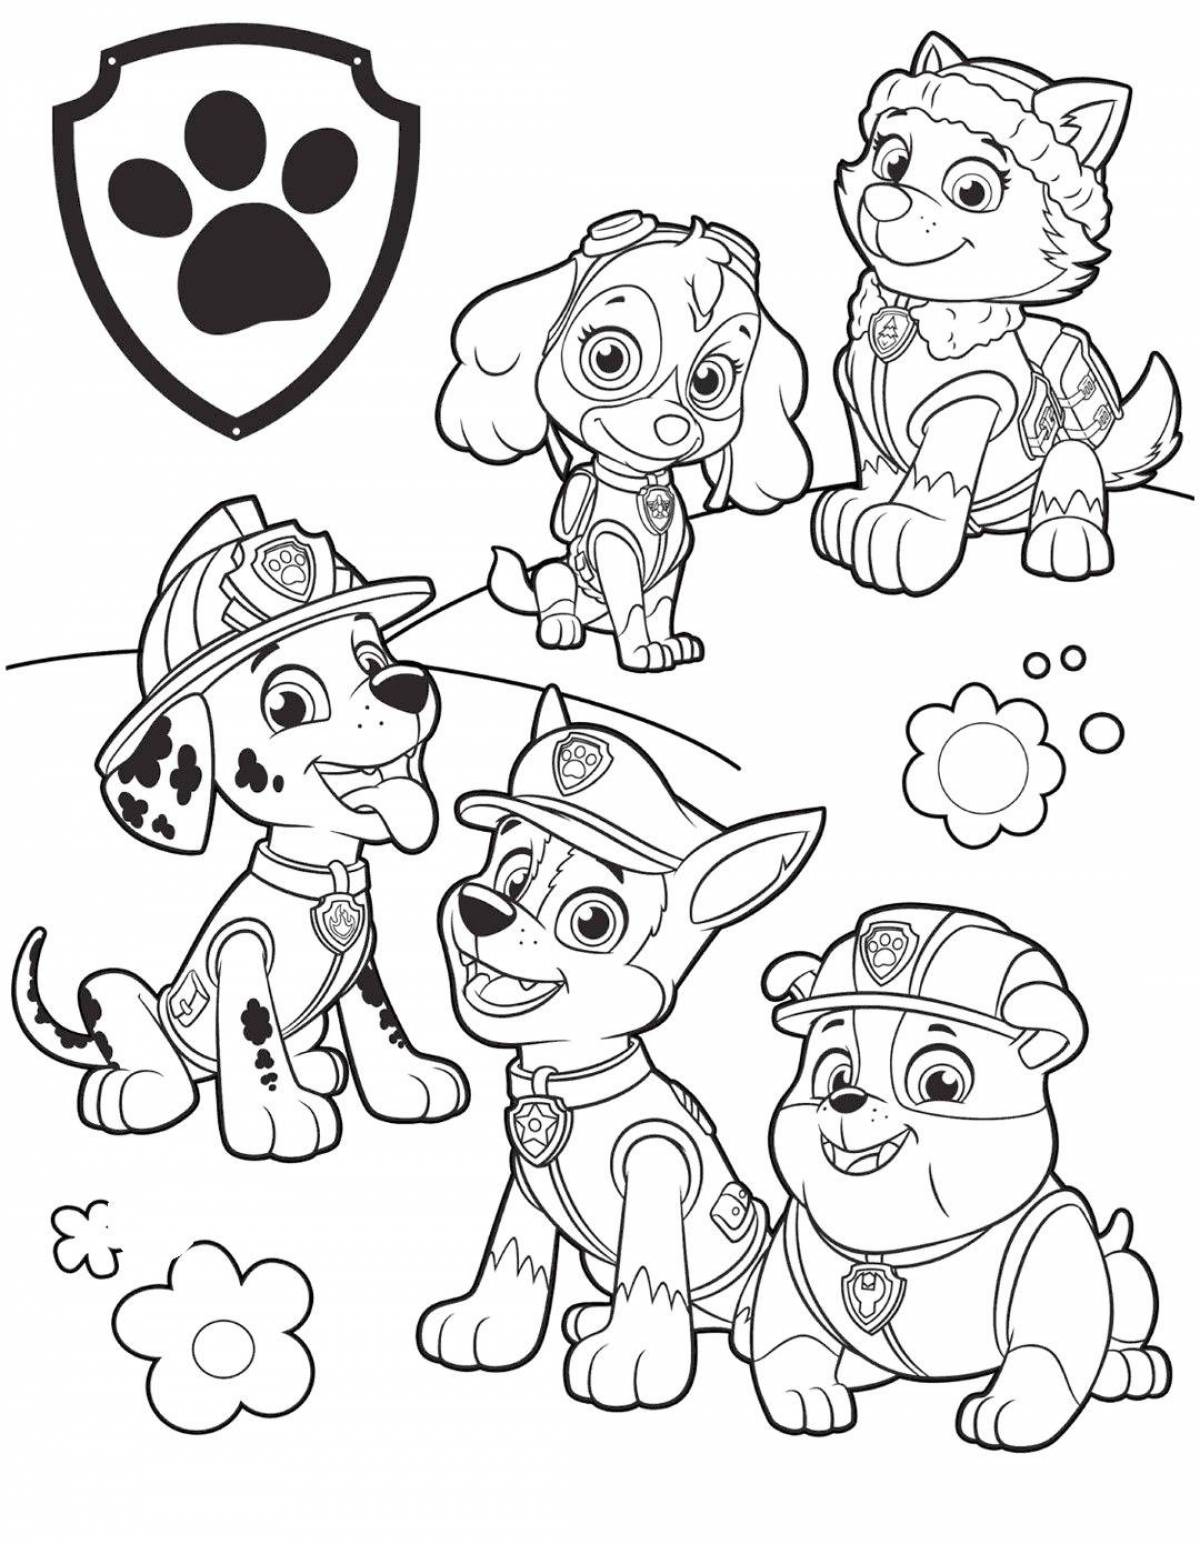 Paw patrol for children 6 7 years old #14